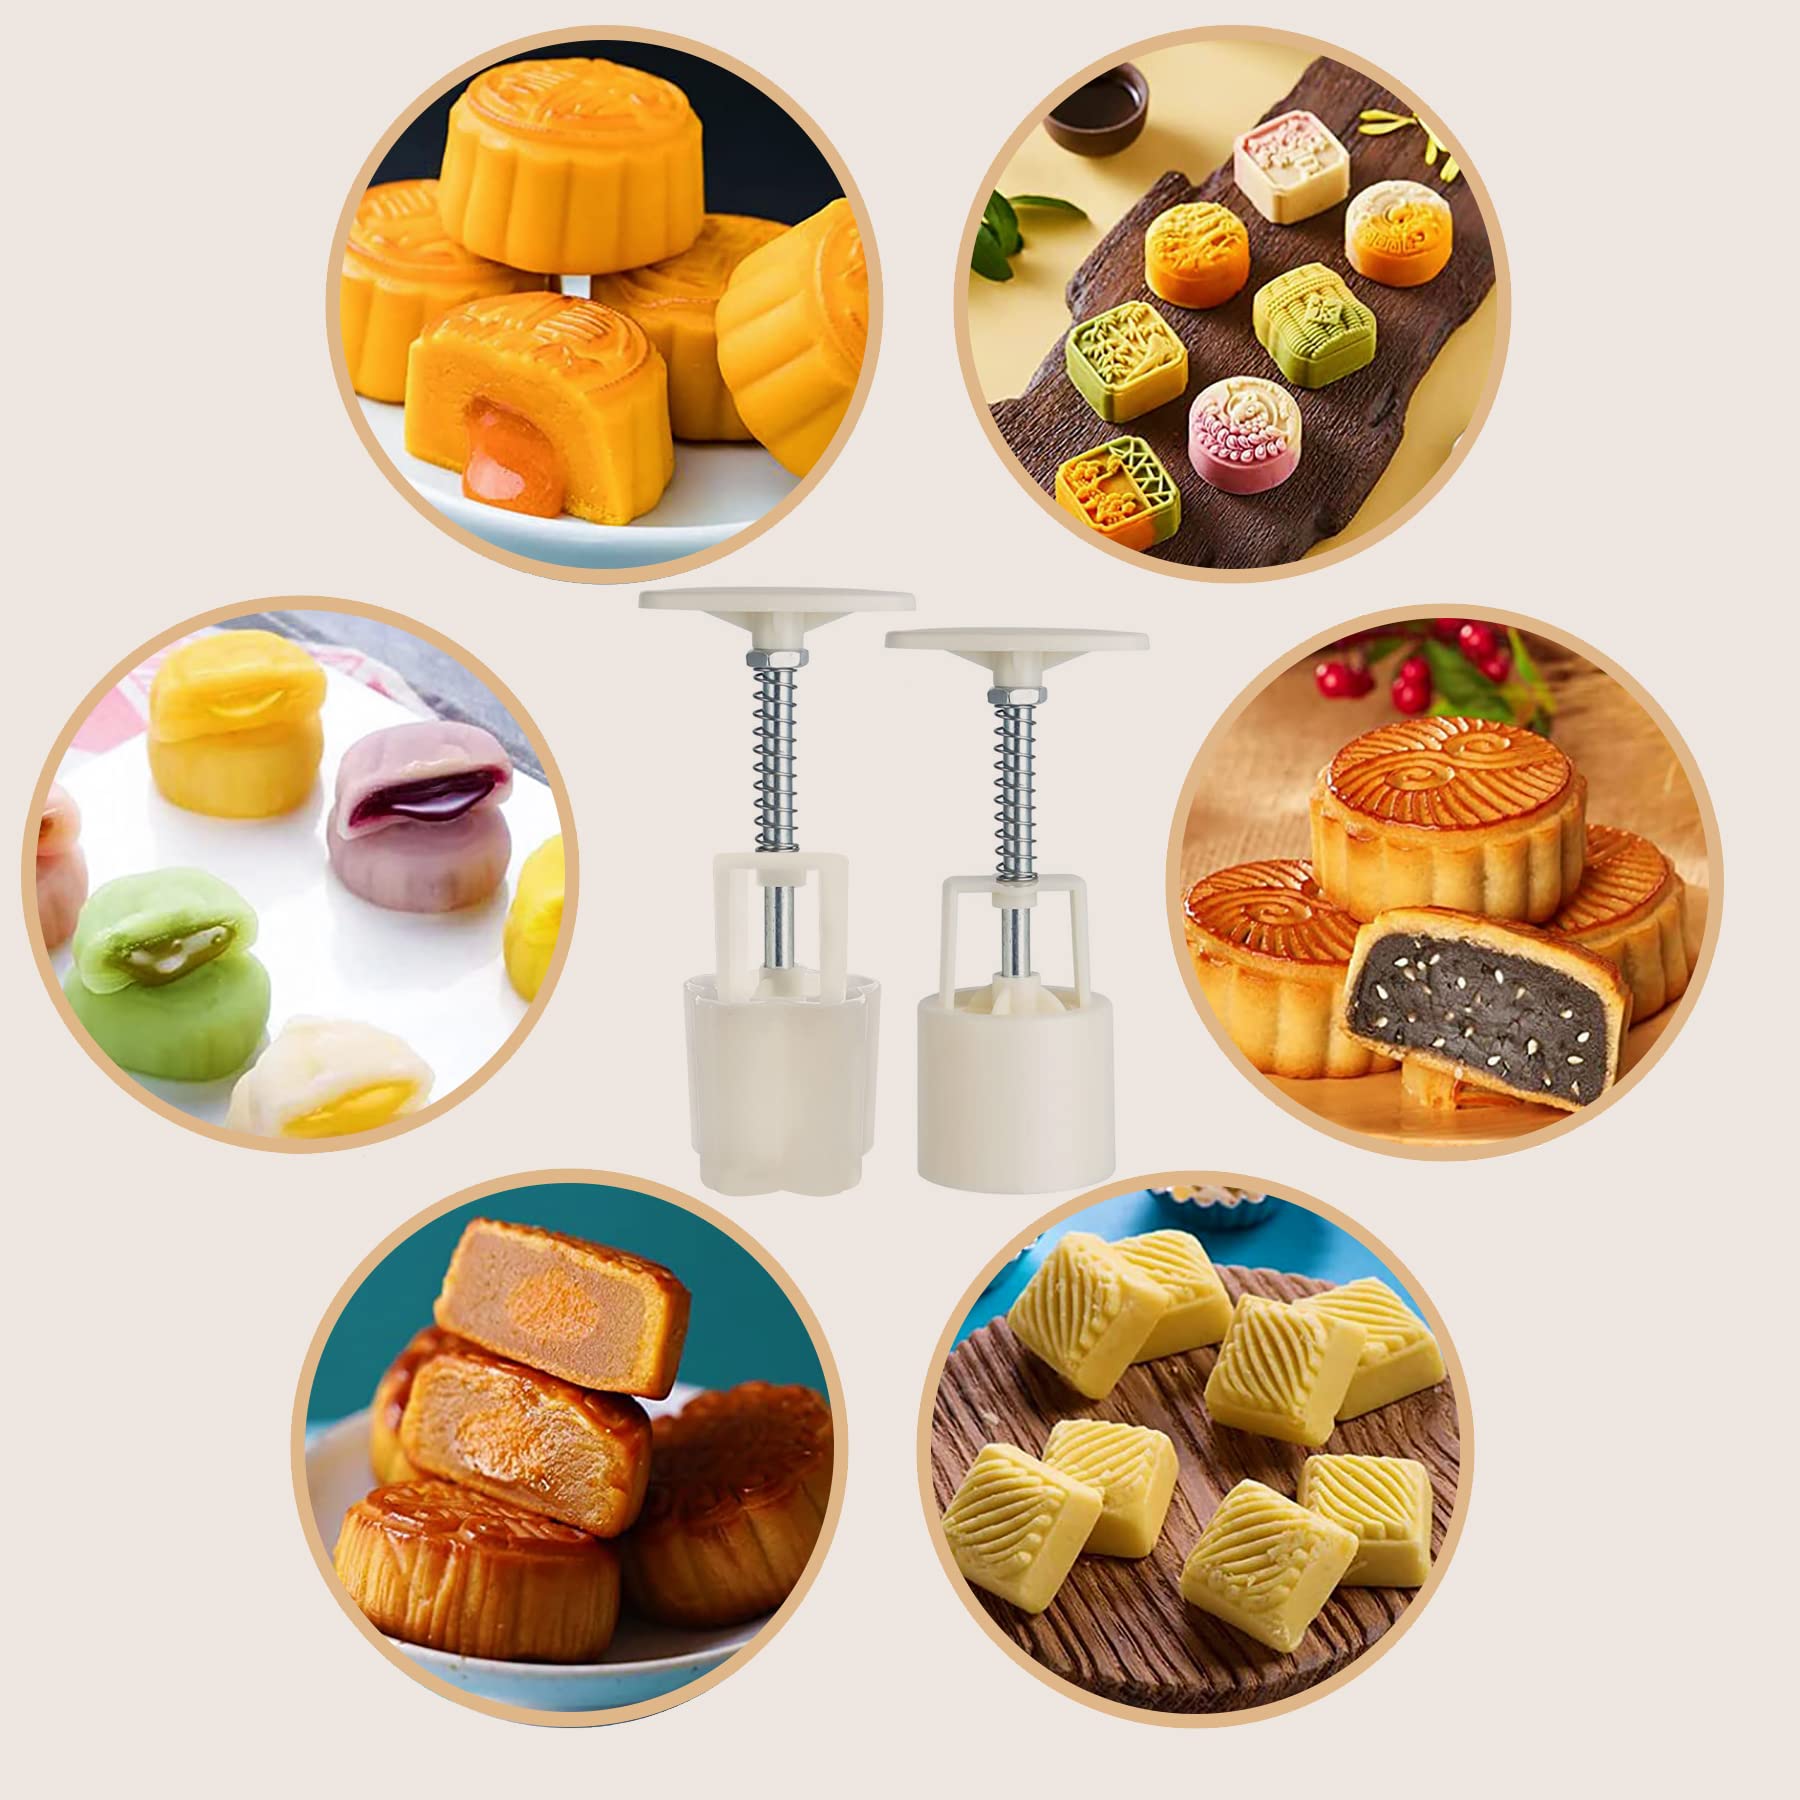 LIUDHPSP Moon Cake Mould Set,Includes 12 pcs Flower pattern base and 2 Pieces Bath Bombs Press,Mid Autumn Festival DIY Hand Press Cookie Stamps Pastry Tool Moon Cake Maker(50g) White (Sakura)